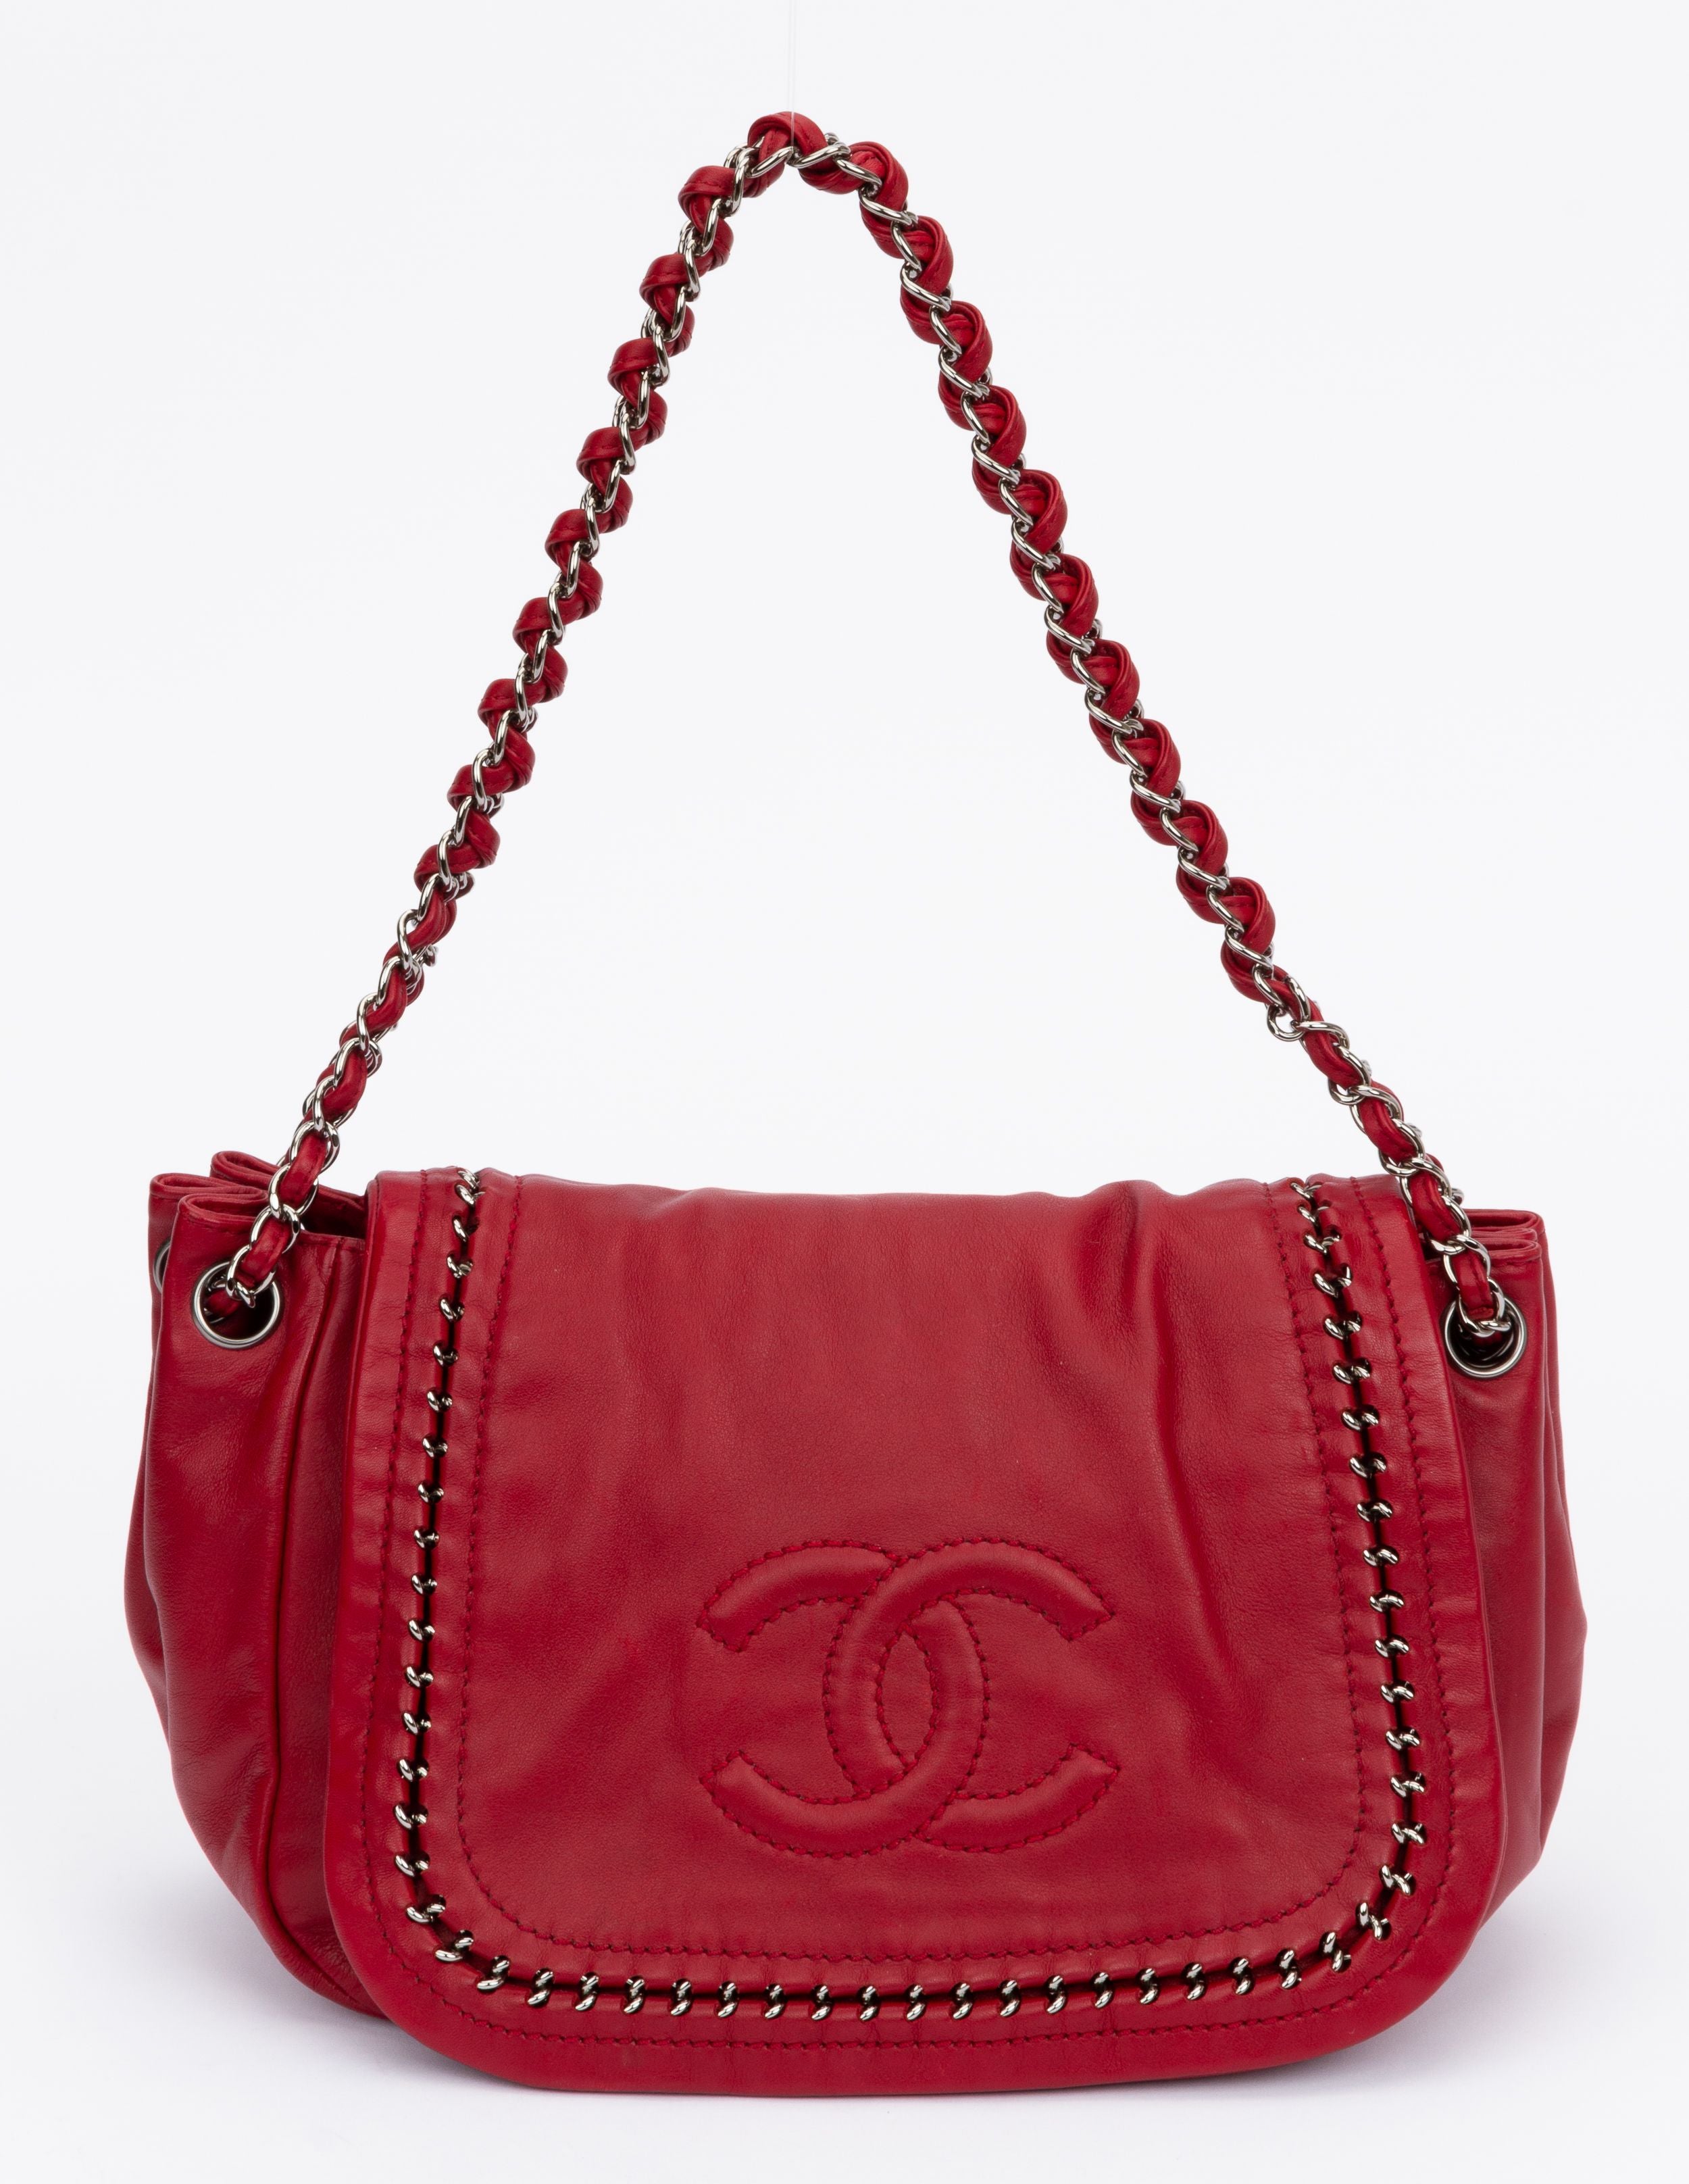 Vintage CHANEL cherry red caviar leather quilted shoulder bag